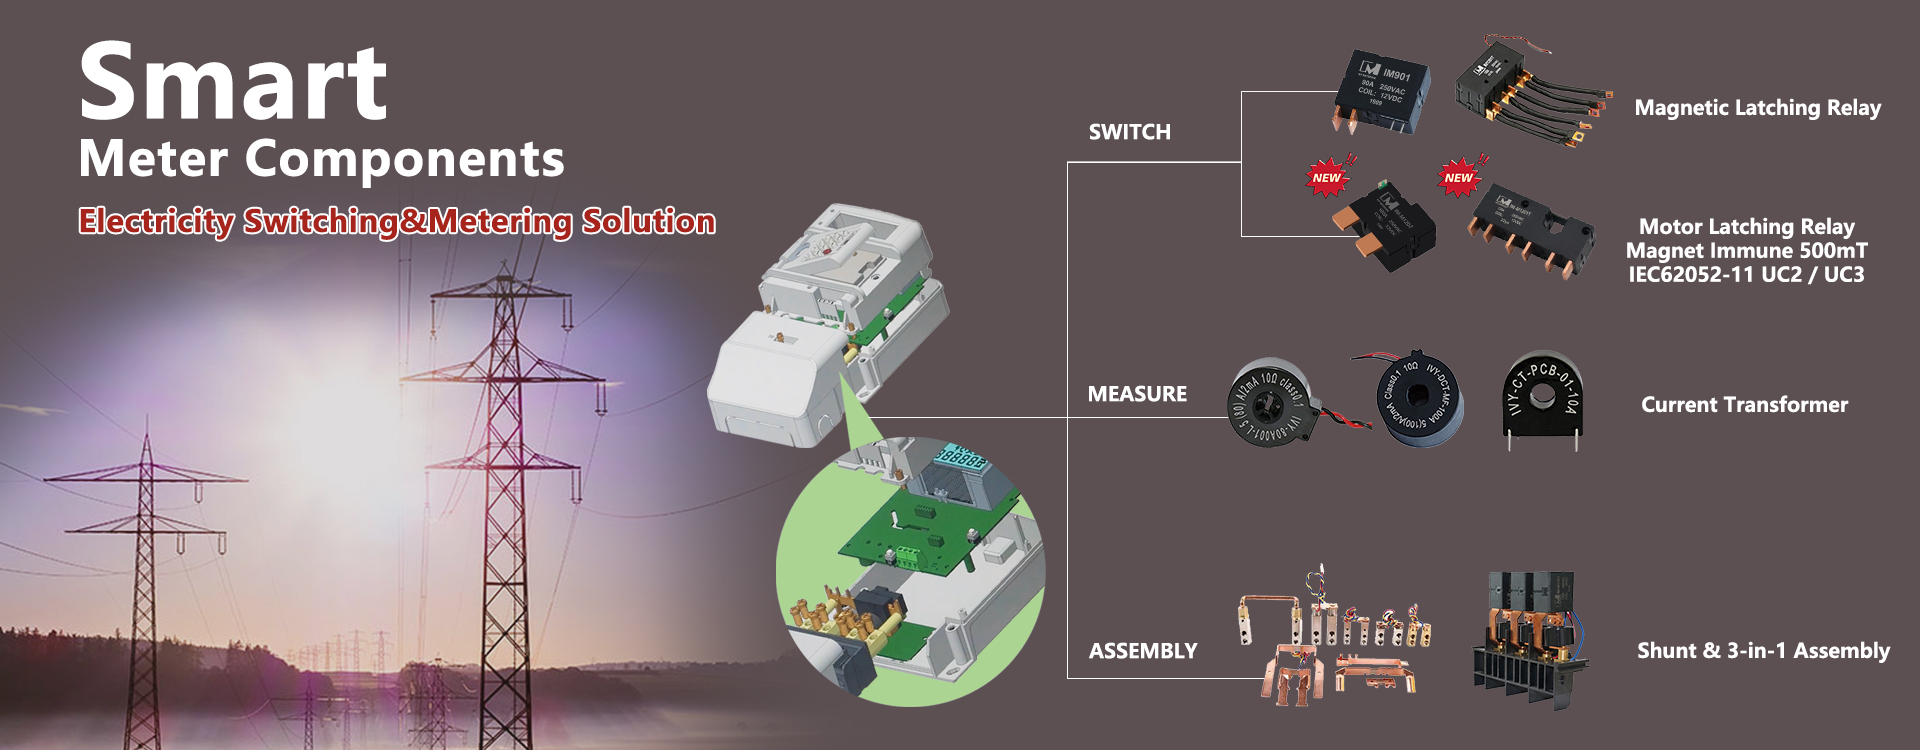 Smart Meter Relay, Magnetic Latching Relay, Bistable Relay, CT, Current Transformer, Shunt, Assembly